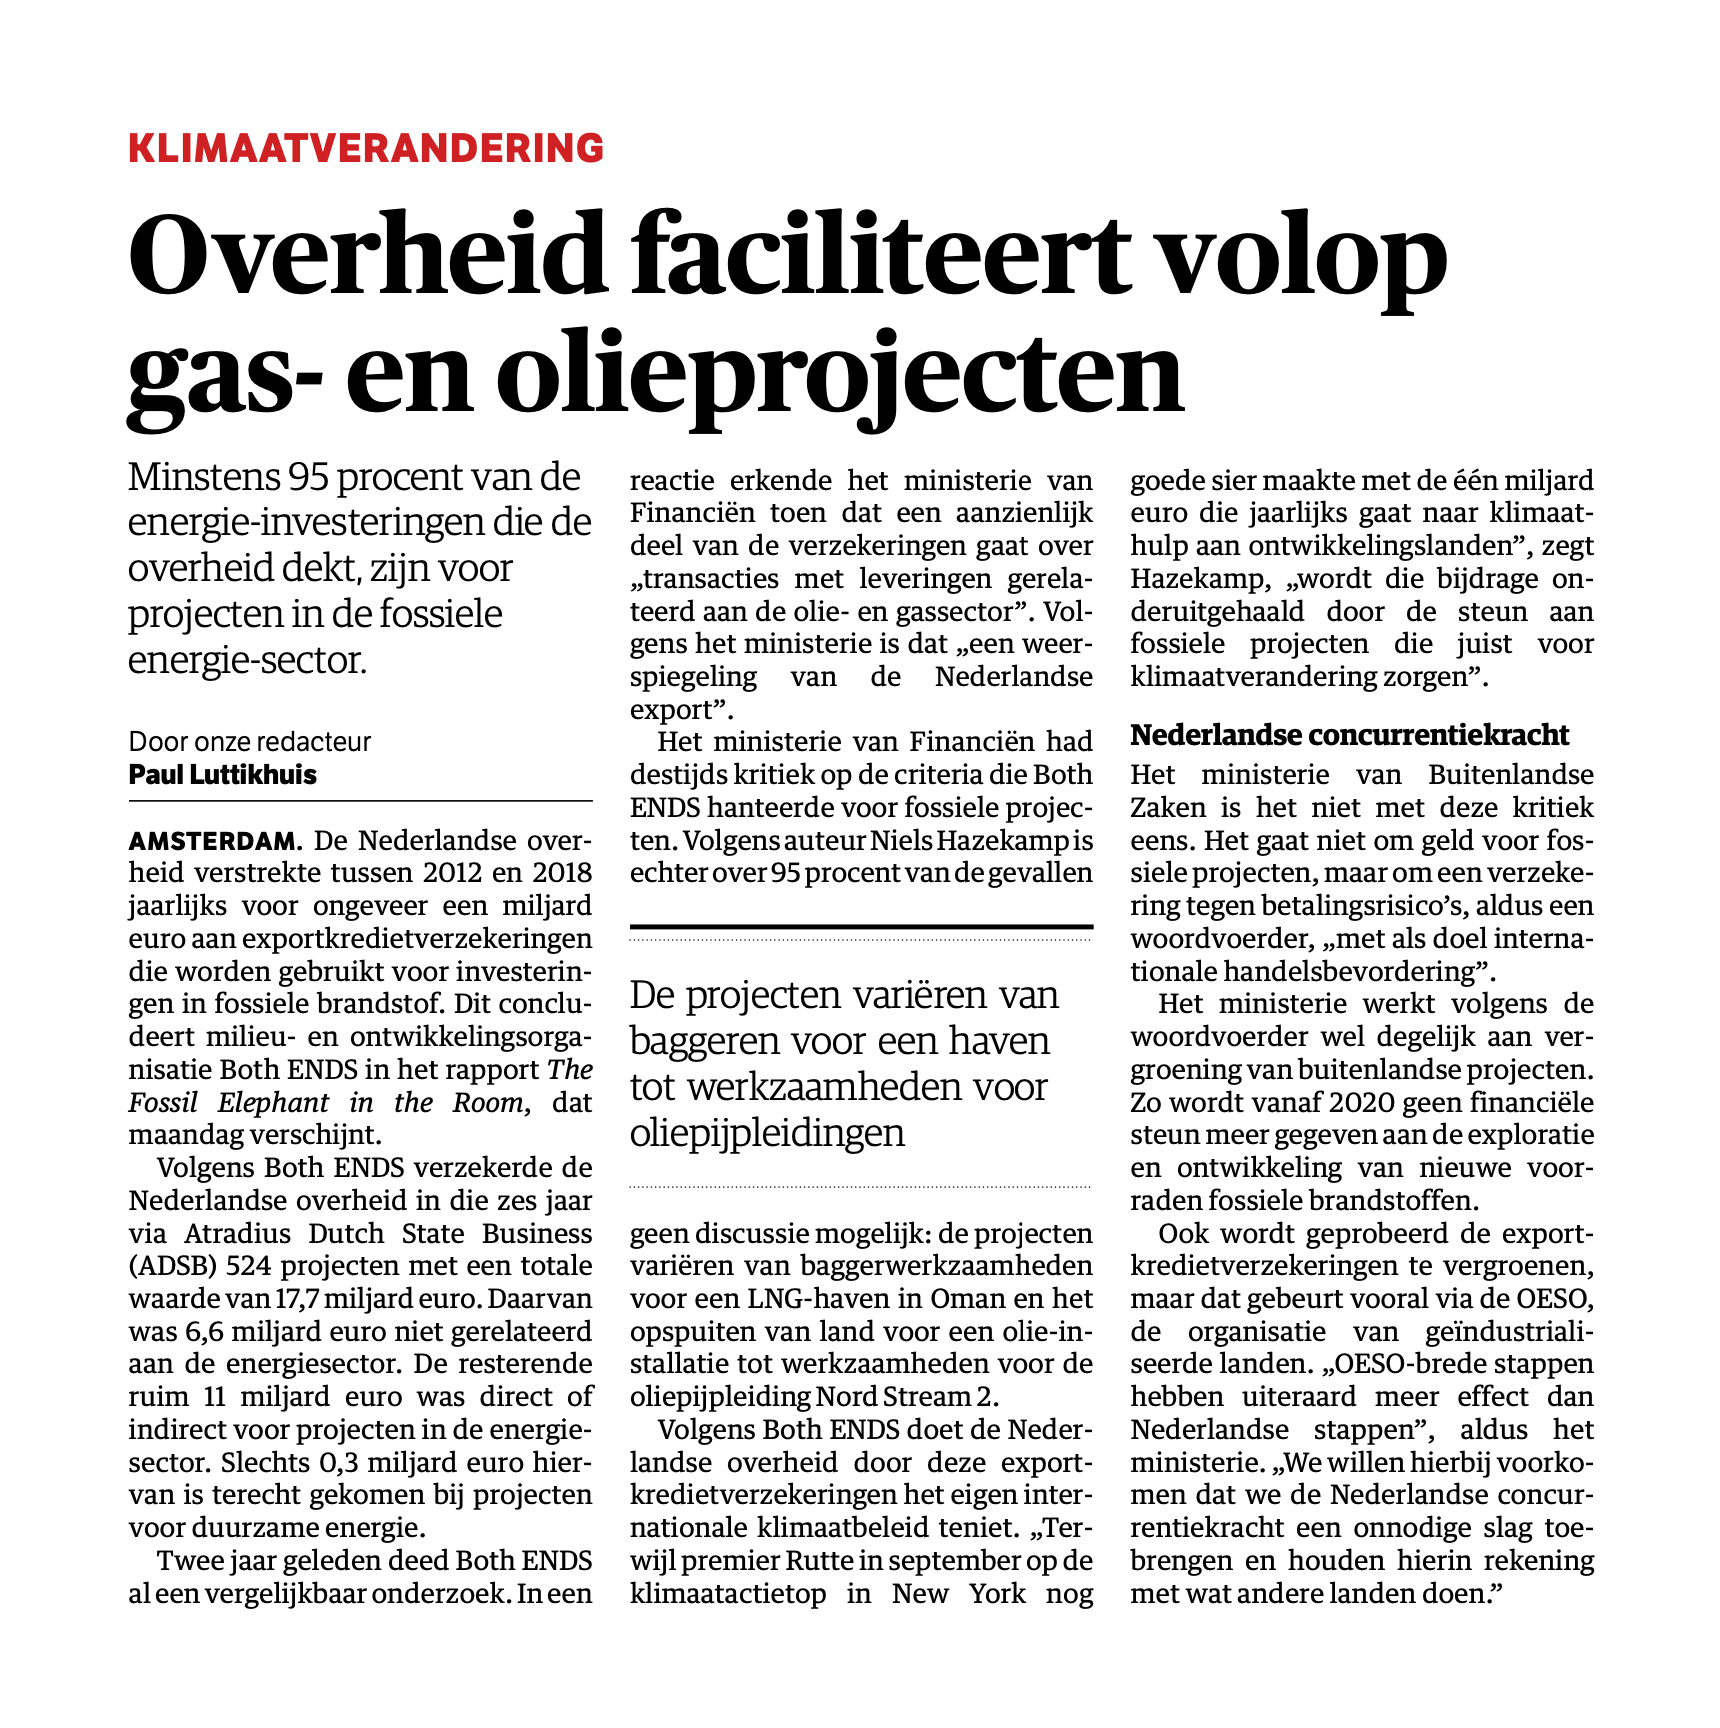 Article in NRC 18 November 2019 quoting our publication about the Dutch export credit agency